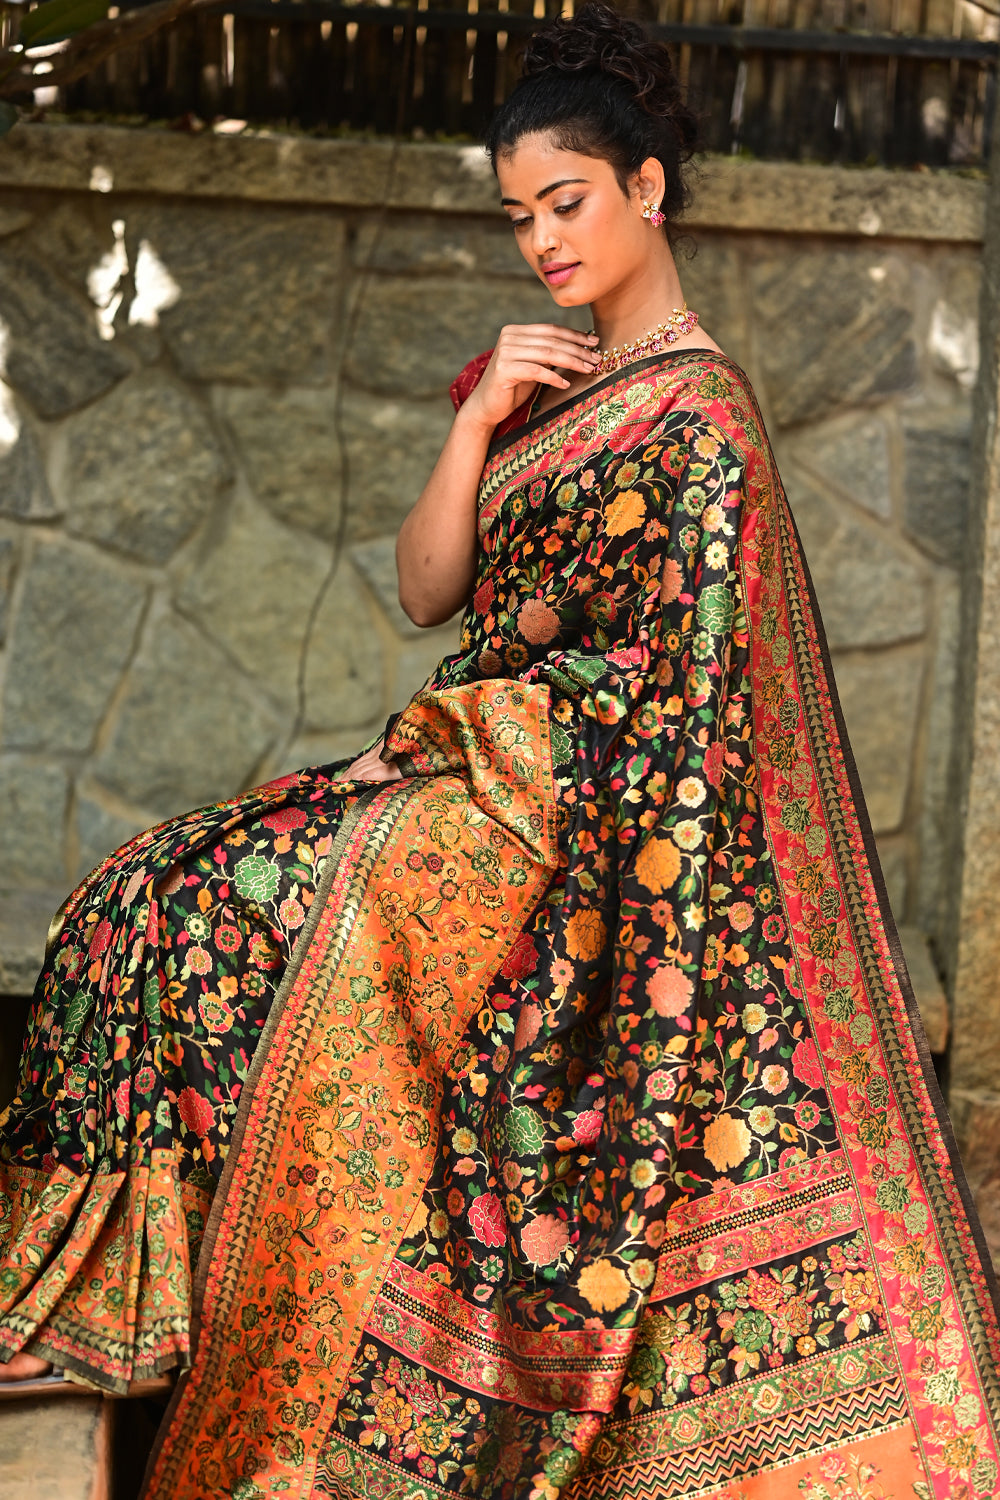 Kani Design with Floral Jaal in Black and Beige Rayon Saree